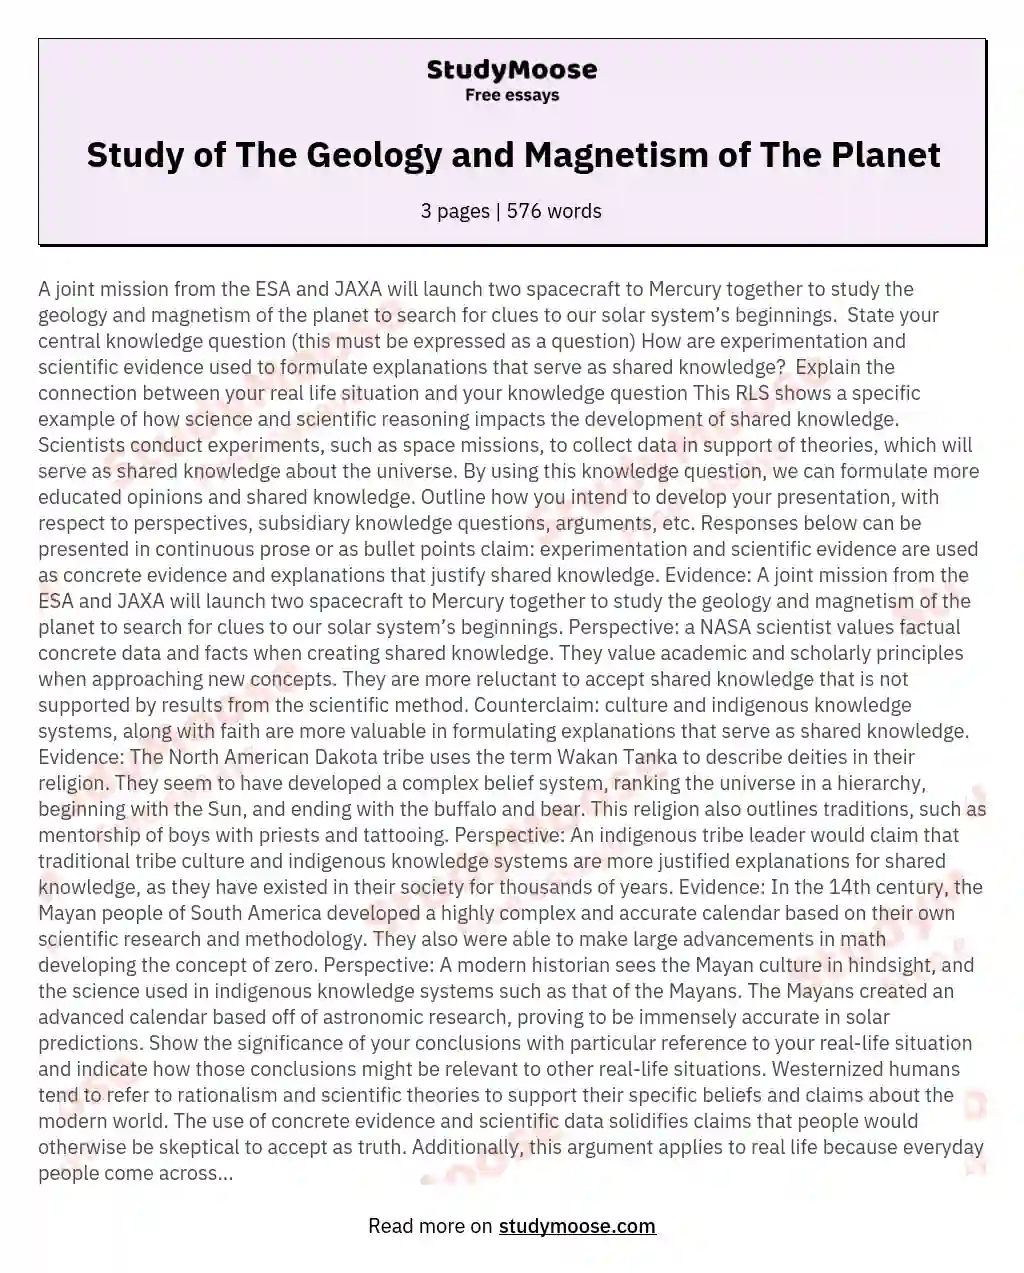 Study of The Geology and Magnetism of The Planet essay